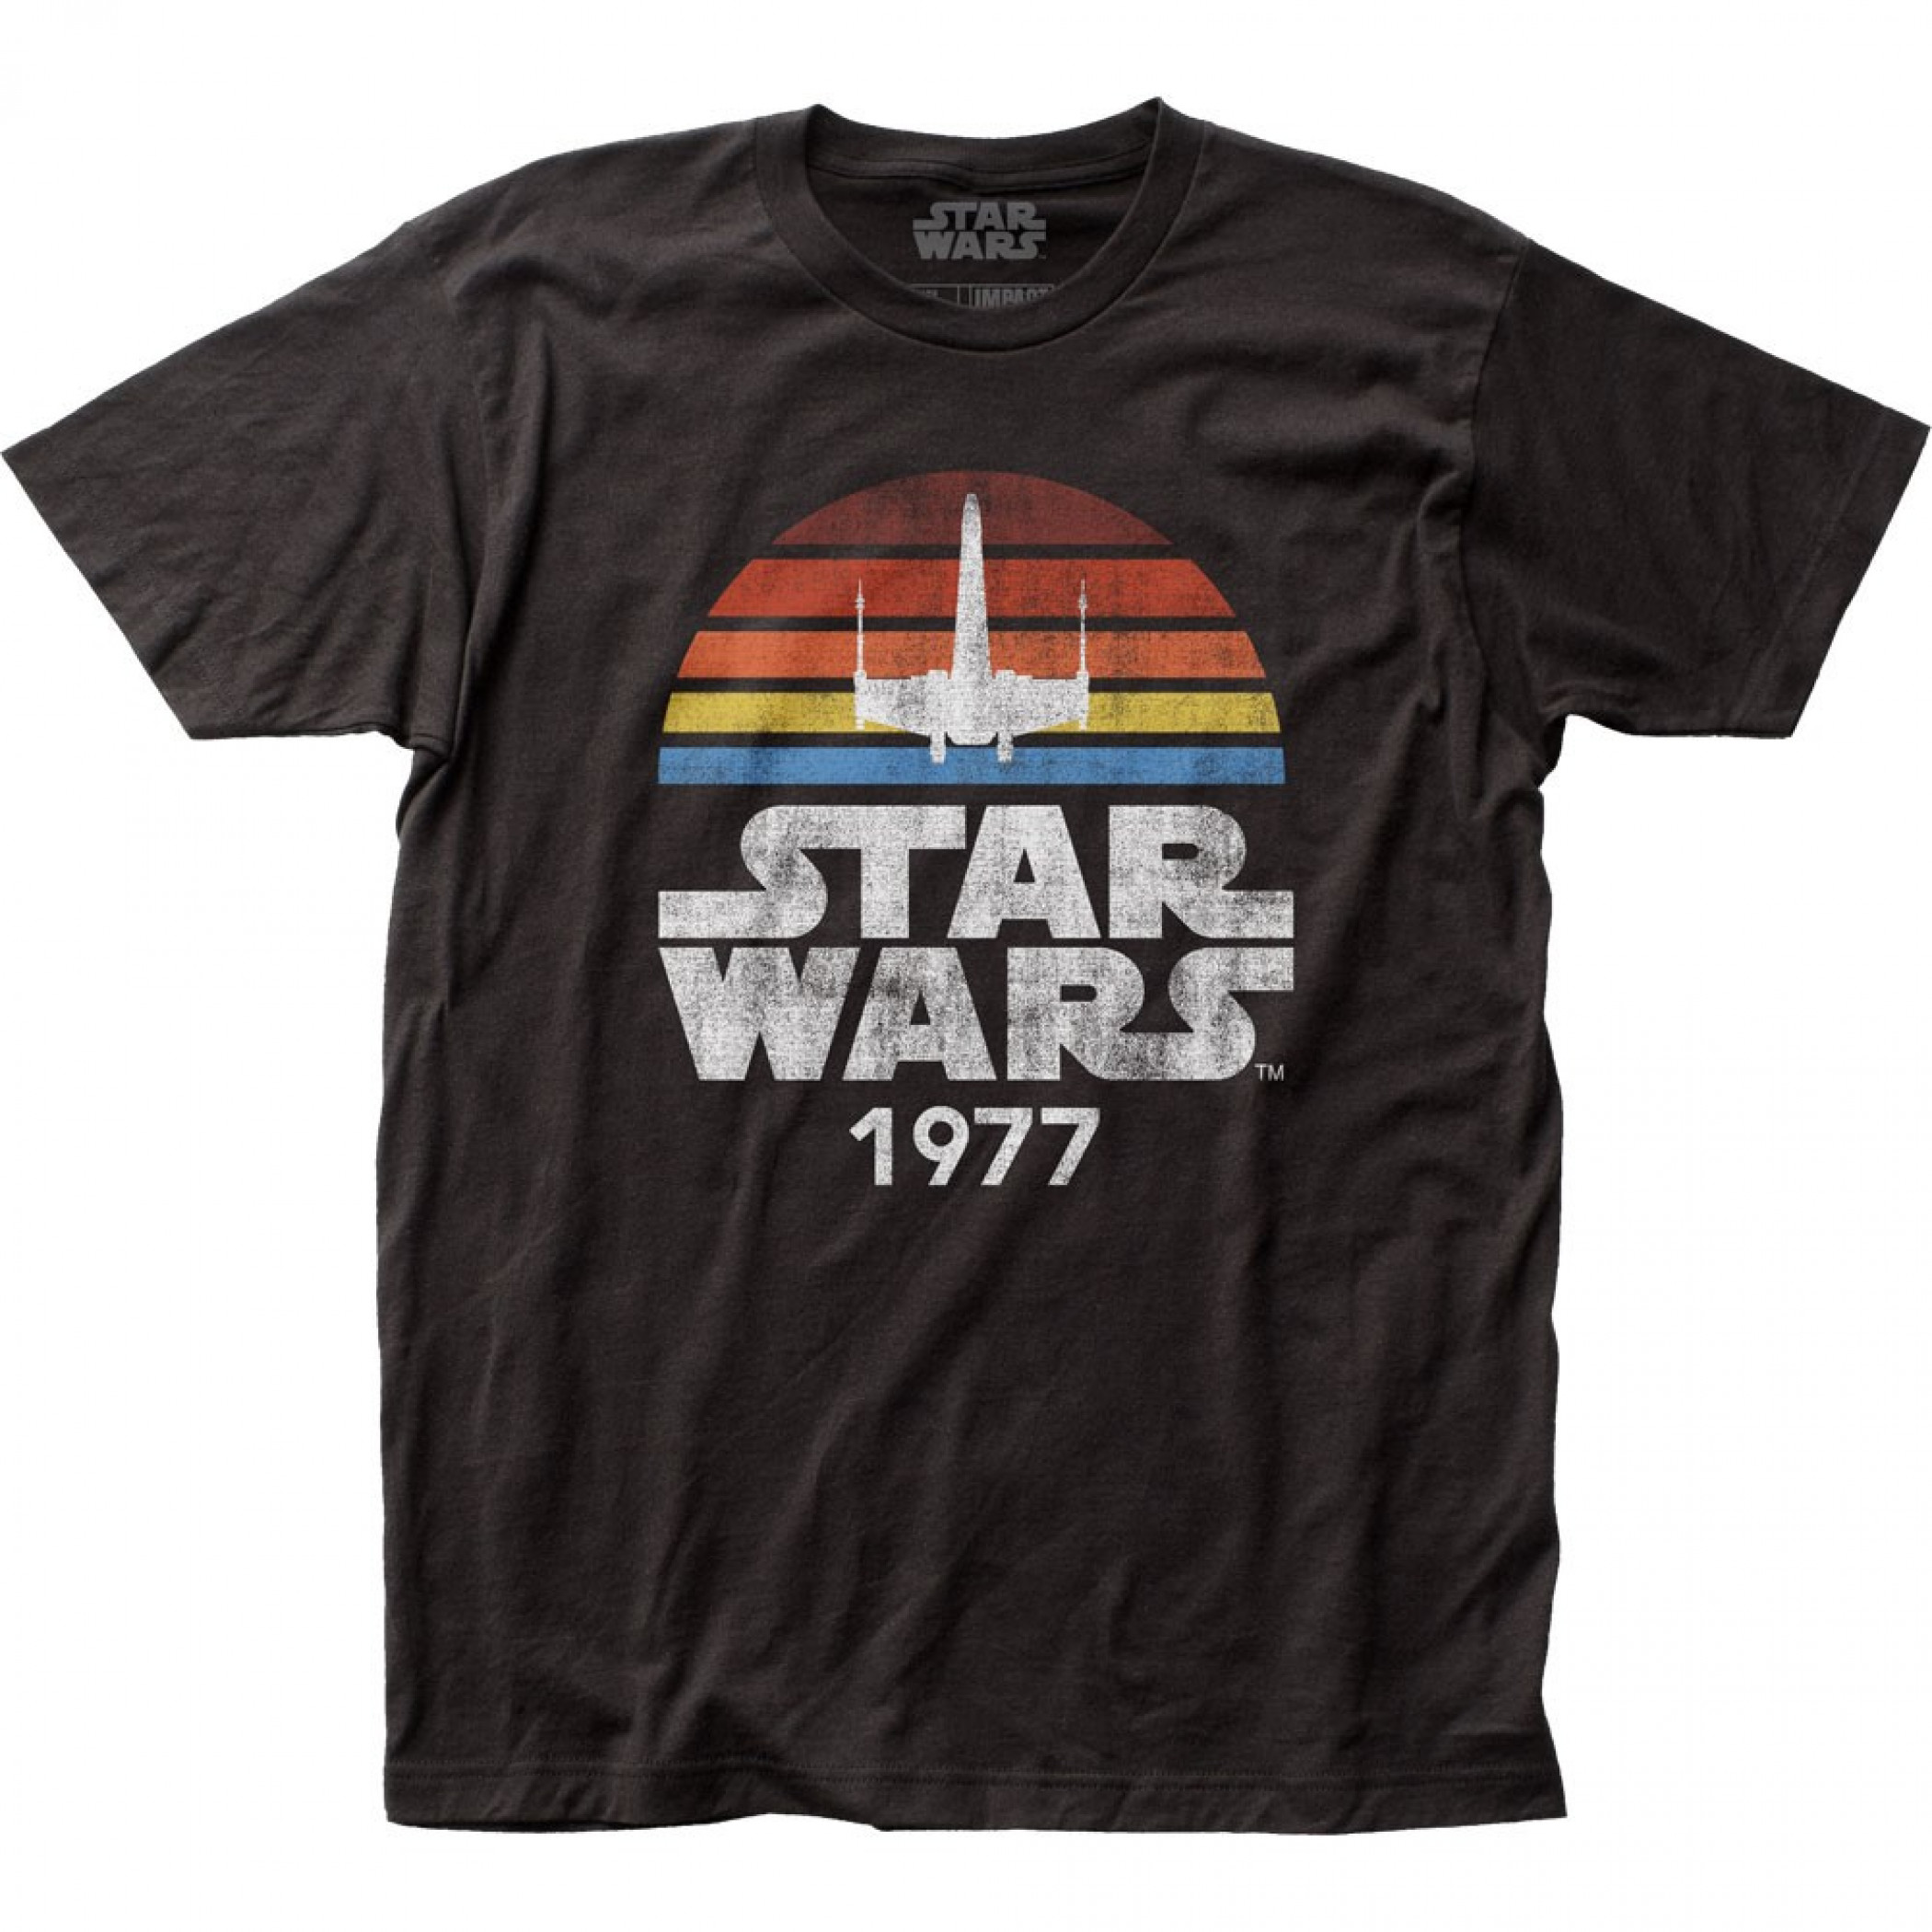 Star Wars 1977 Fitted Jersey T-Shirt